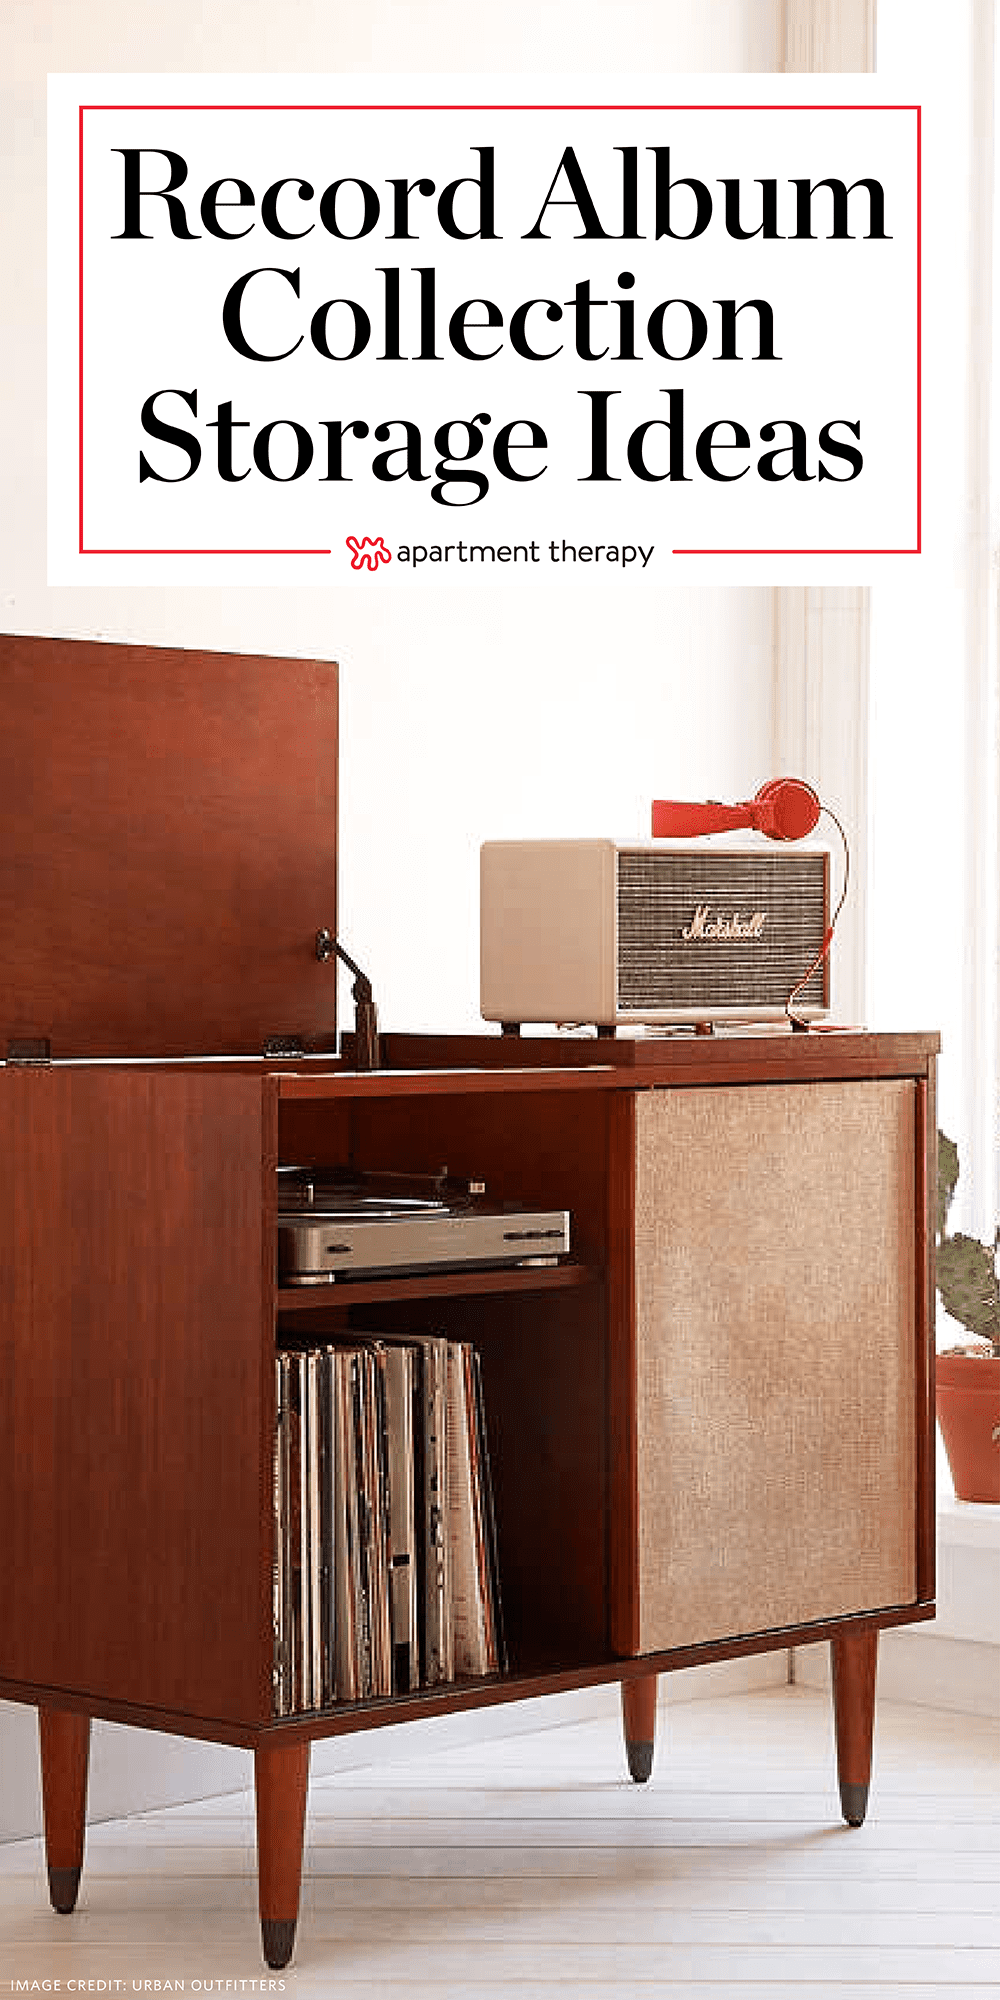 Vinyl Record Storage Ideas To Keep Your LP Collection Organized